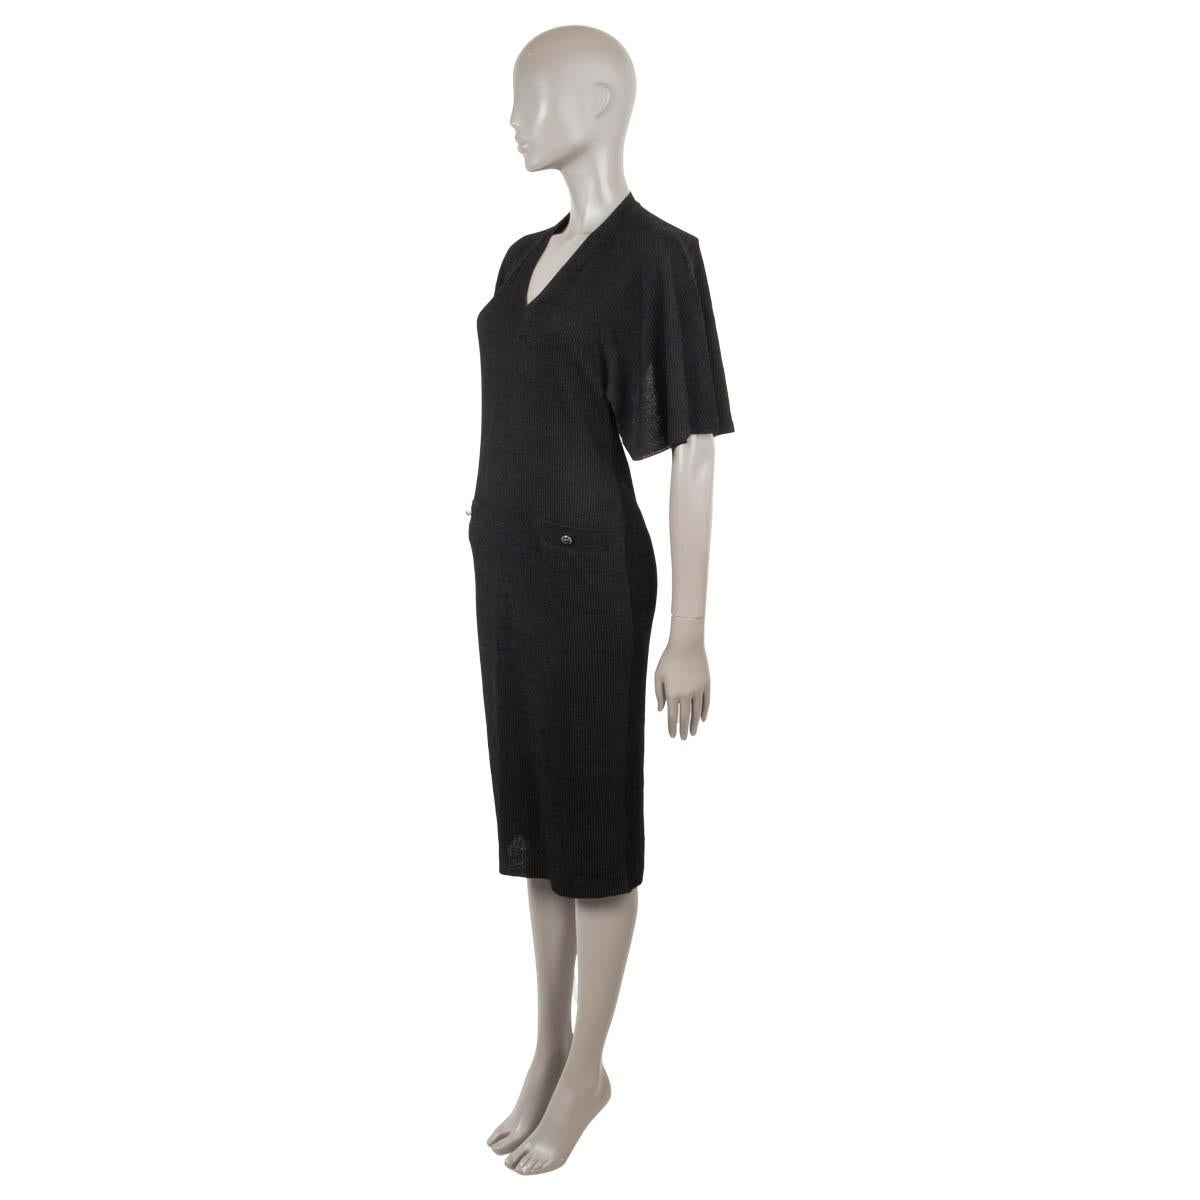 100% authentic Chanel backless cape sleeve ribbed knit dress in black polyester (52%) and curpo (48%) (please note the content tag is missing). The design features a v-neck and two classic patch-pockets at front. Has been worn once and is in